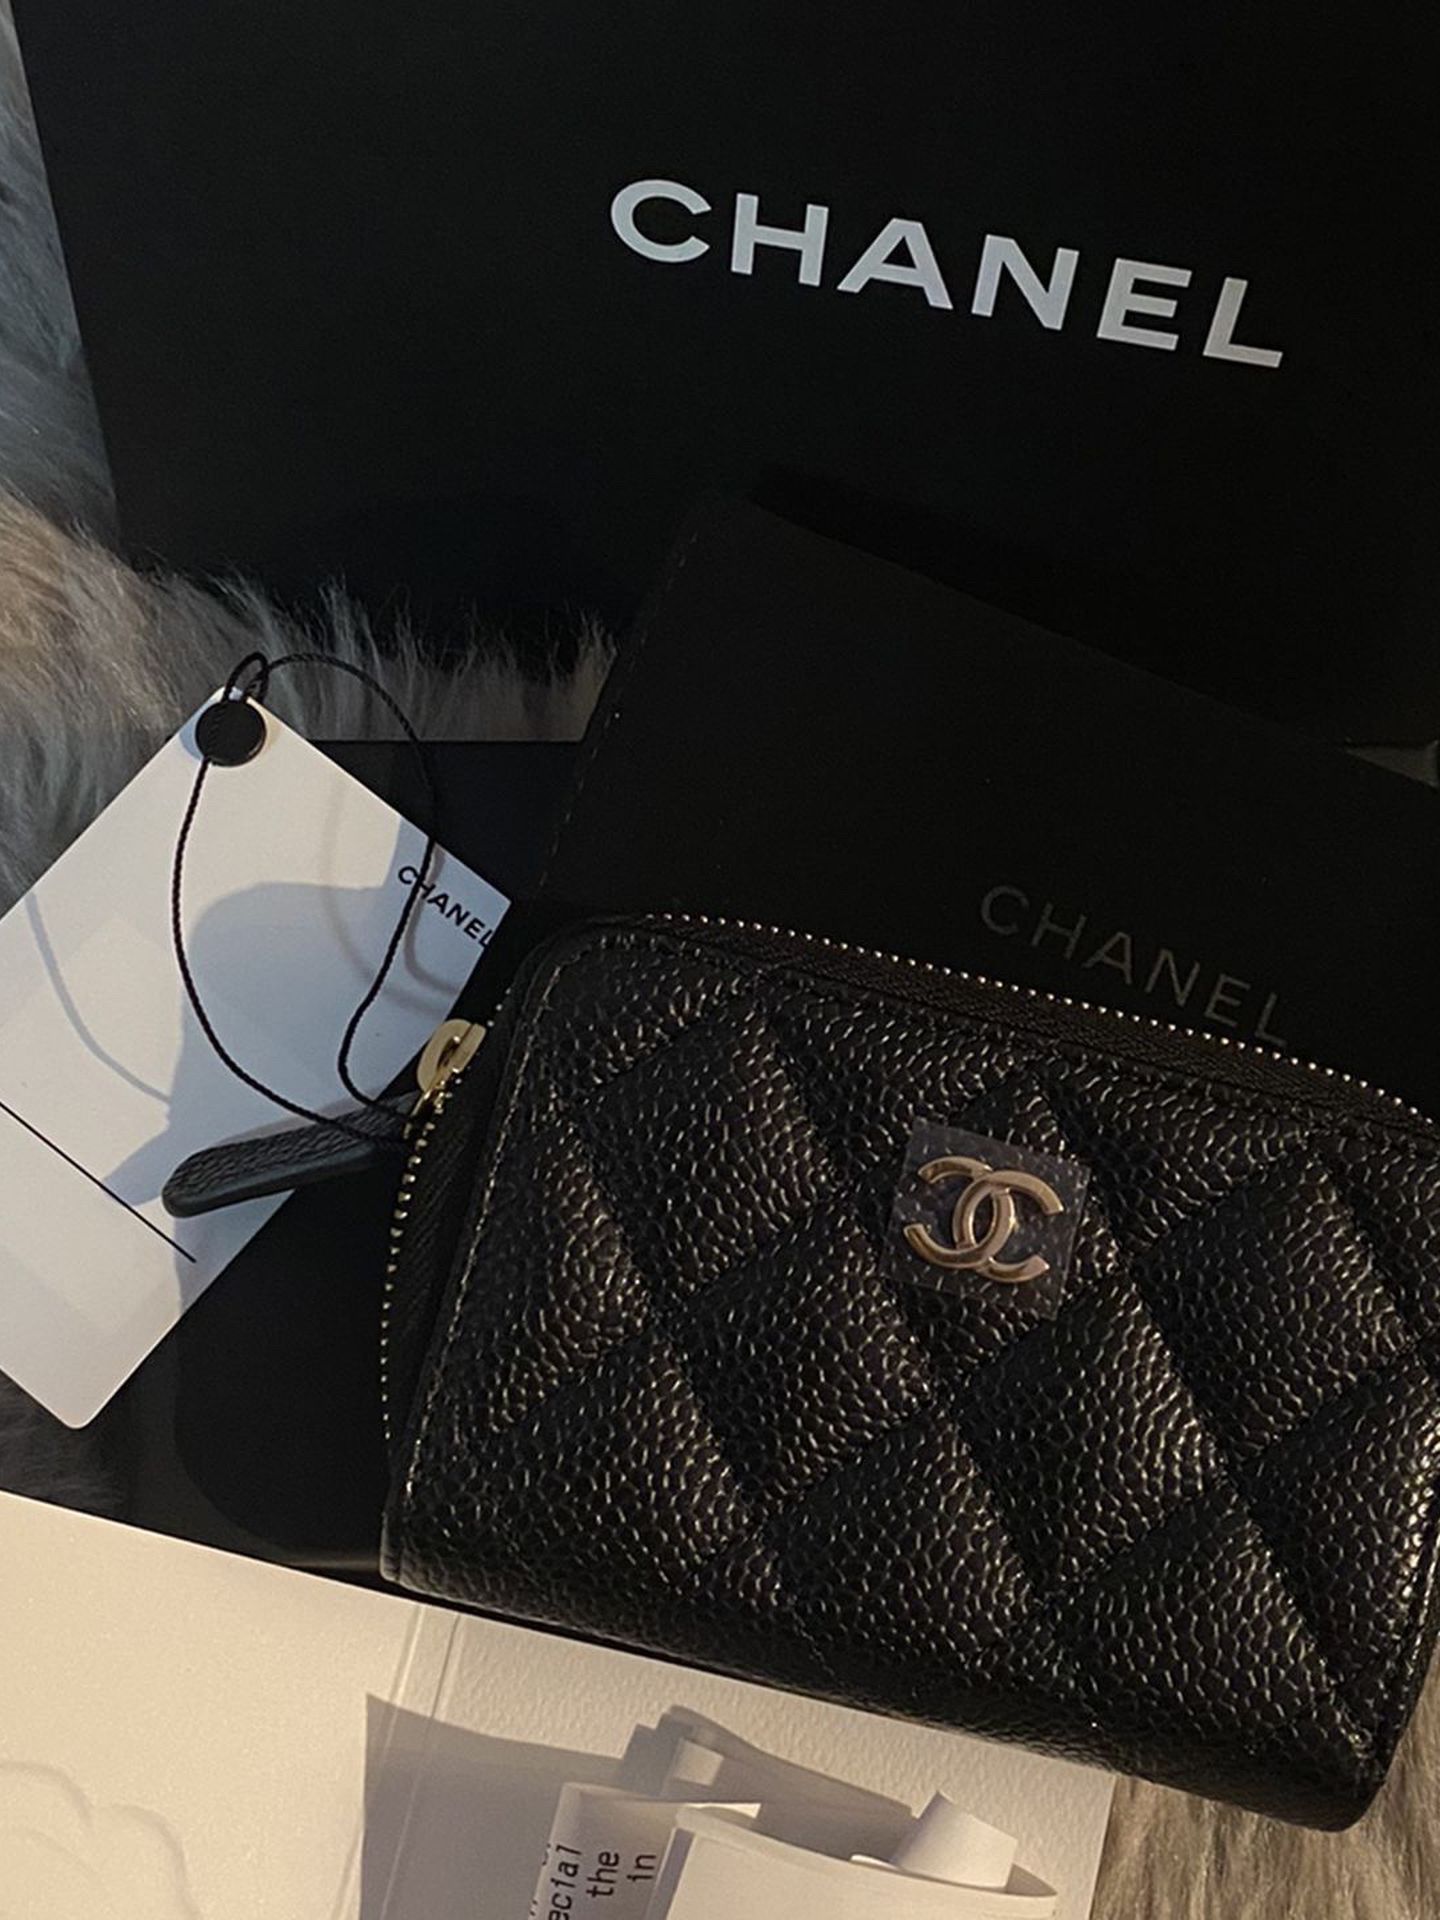 Brand New Authentic Chanel Wallet! Will Not lower Price